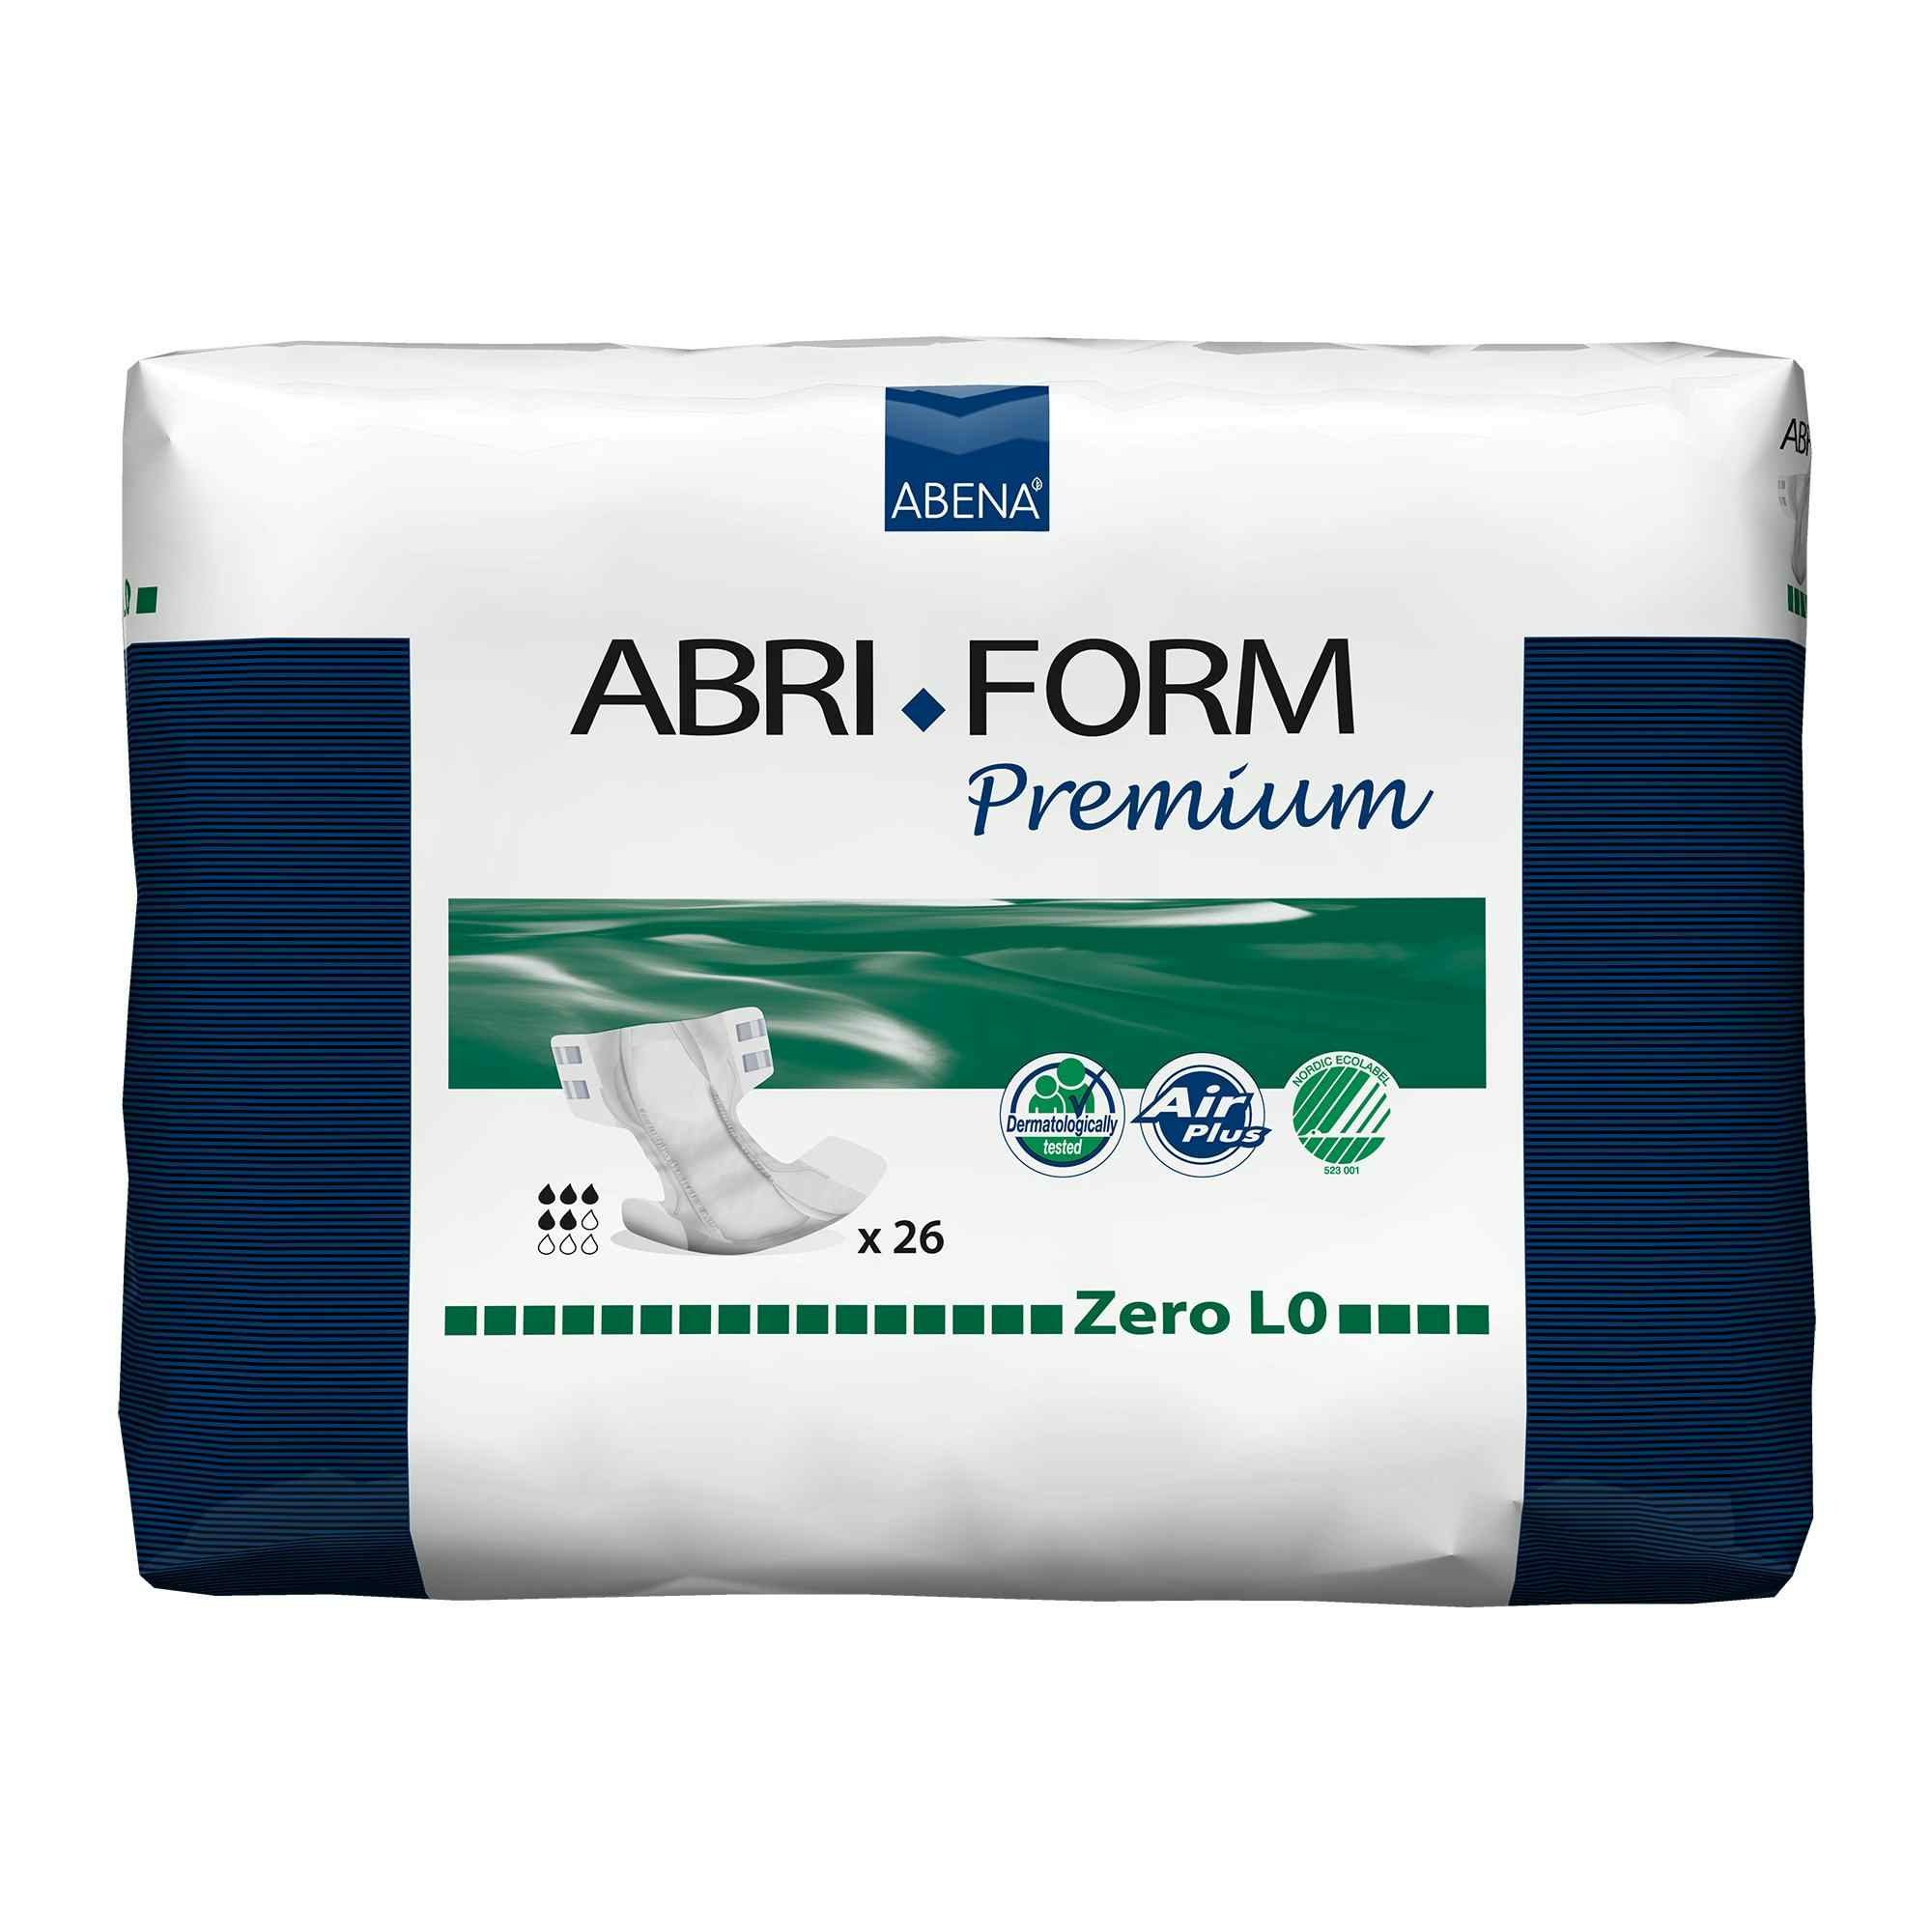 Abri-Form Premium L0 Unisex Adult Disposable Diaper with tabs, Heavy Absorbency, 43059, Large (40-60") - Bag of 26